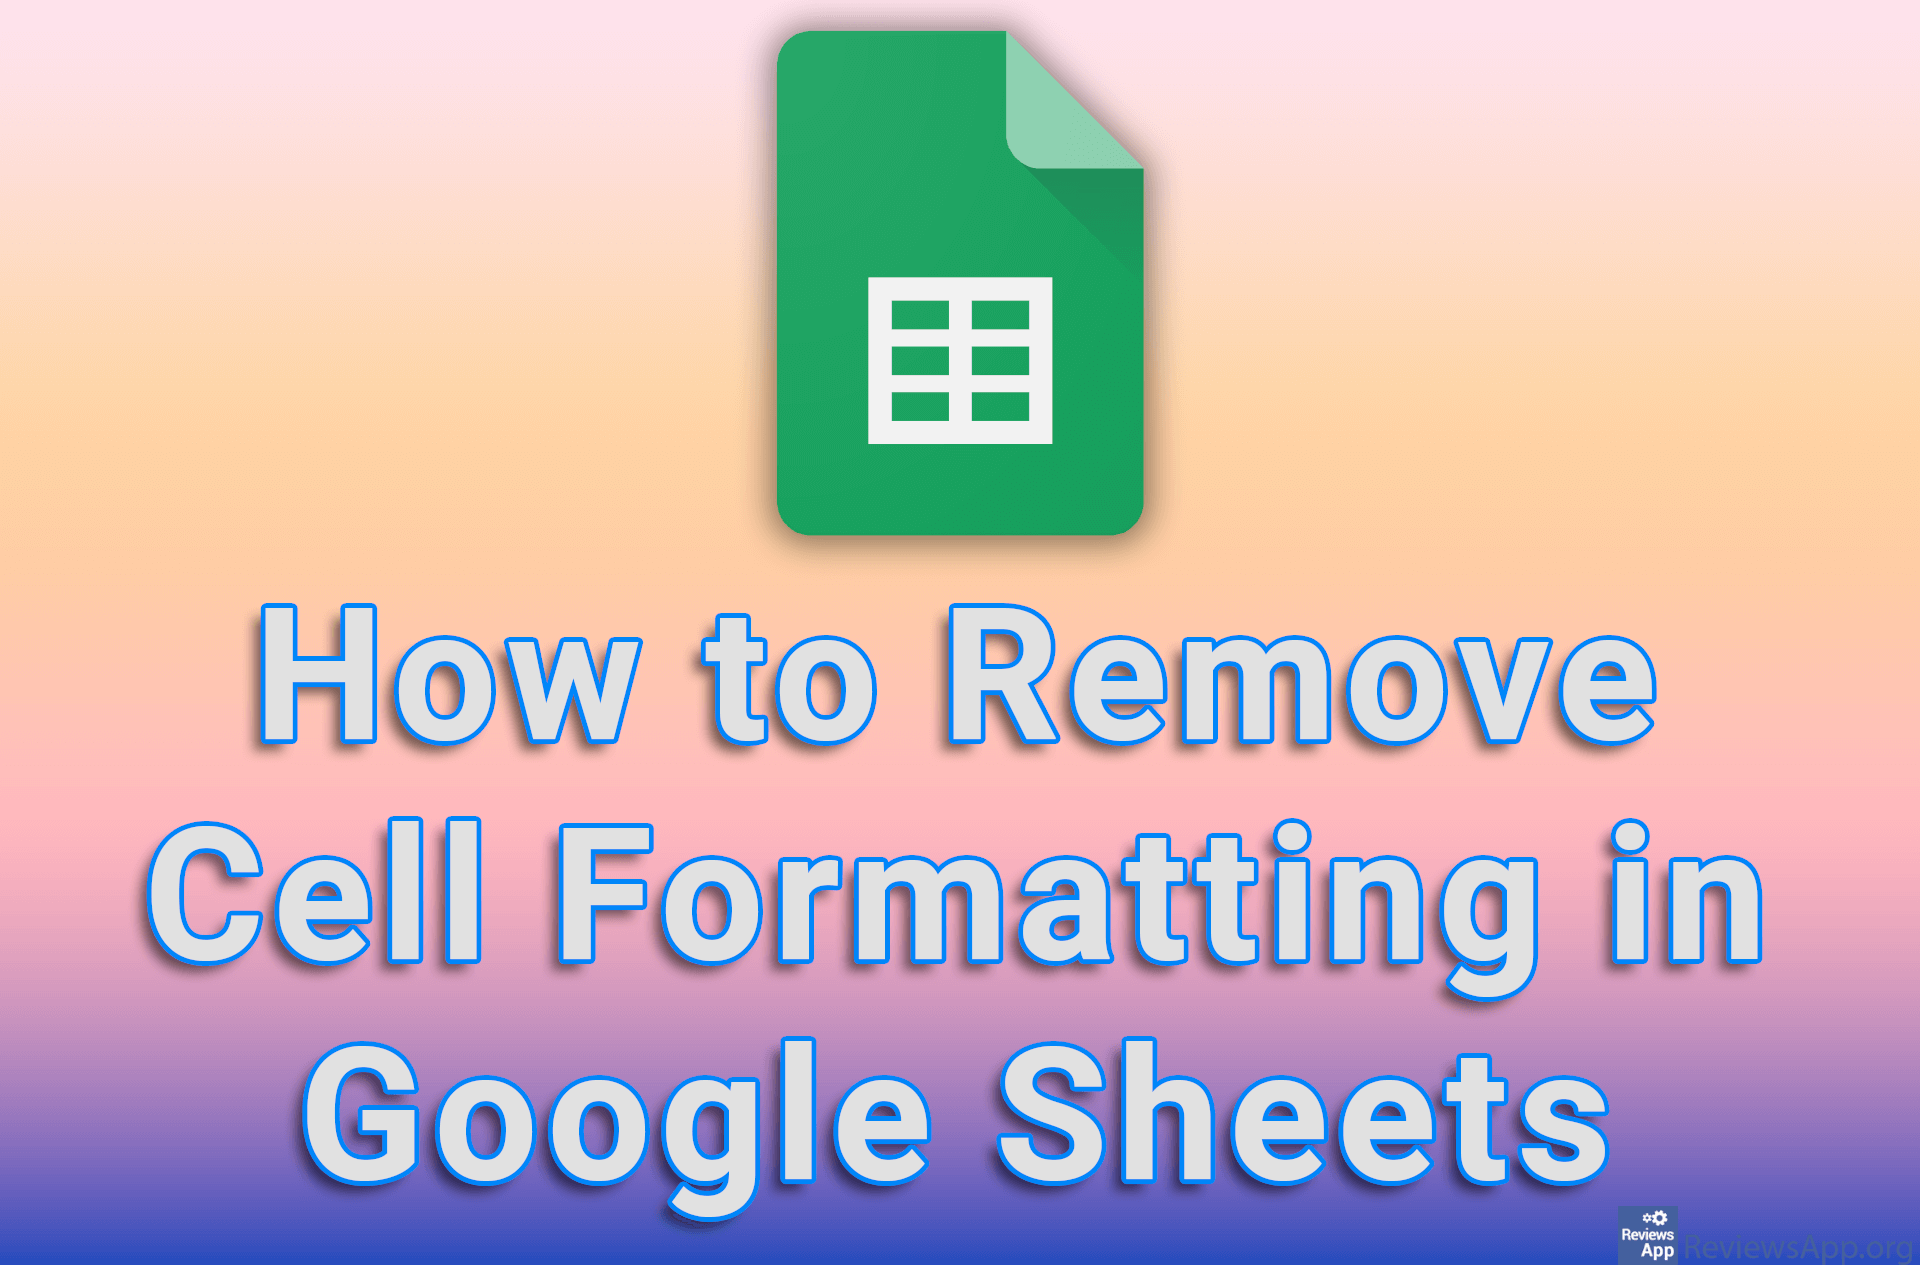 How to Remove Cell Formatting in Google Sheets